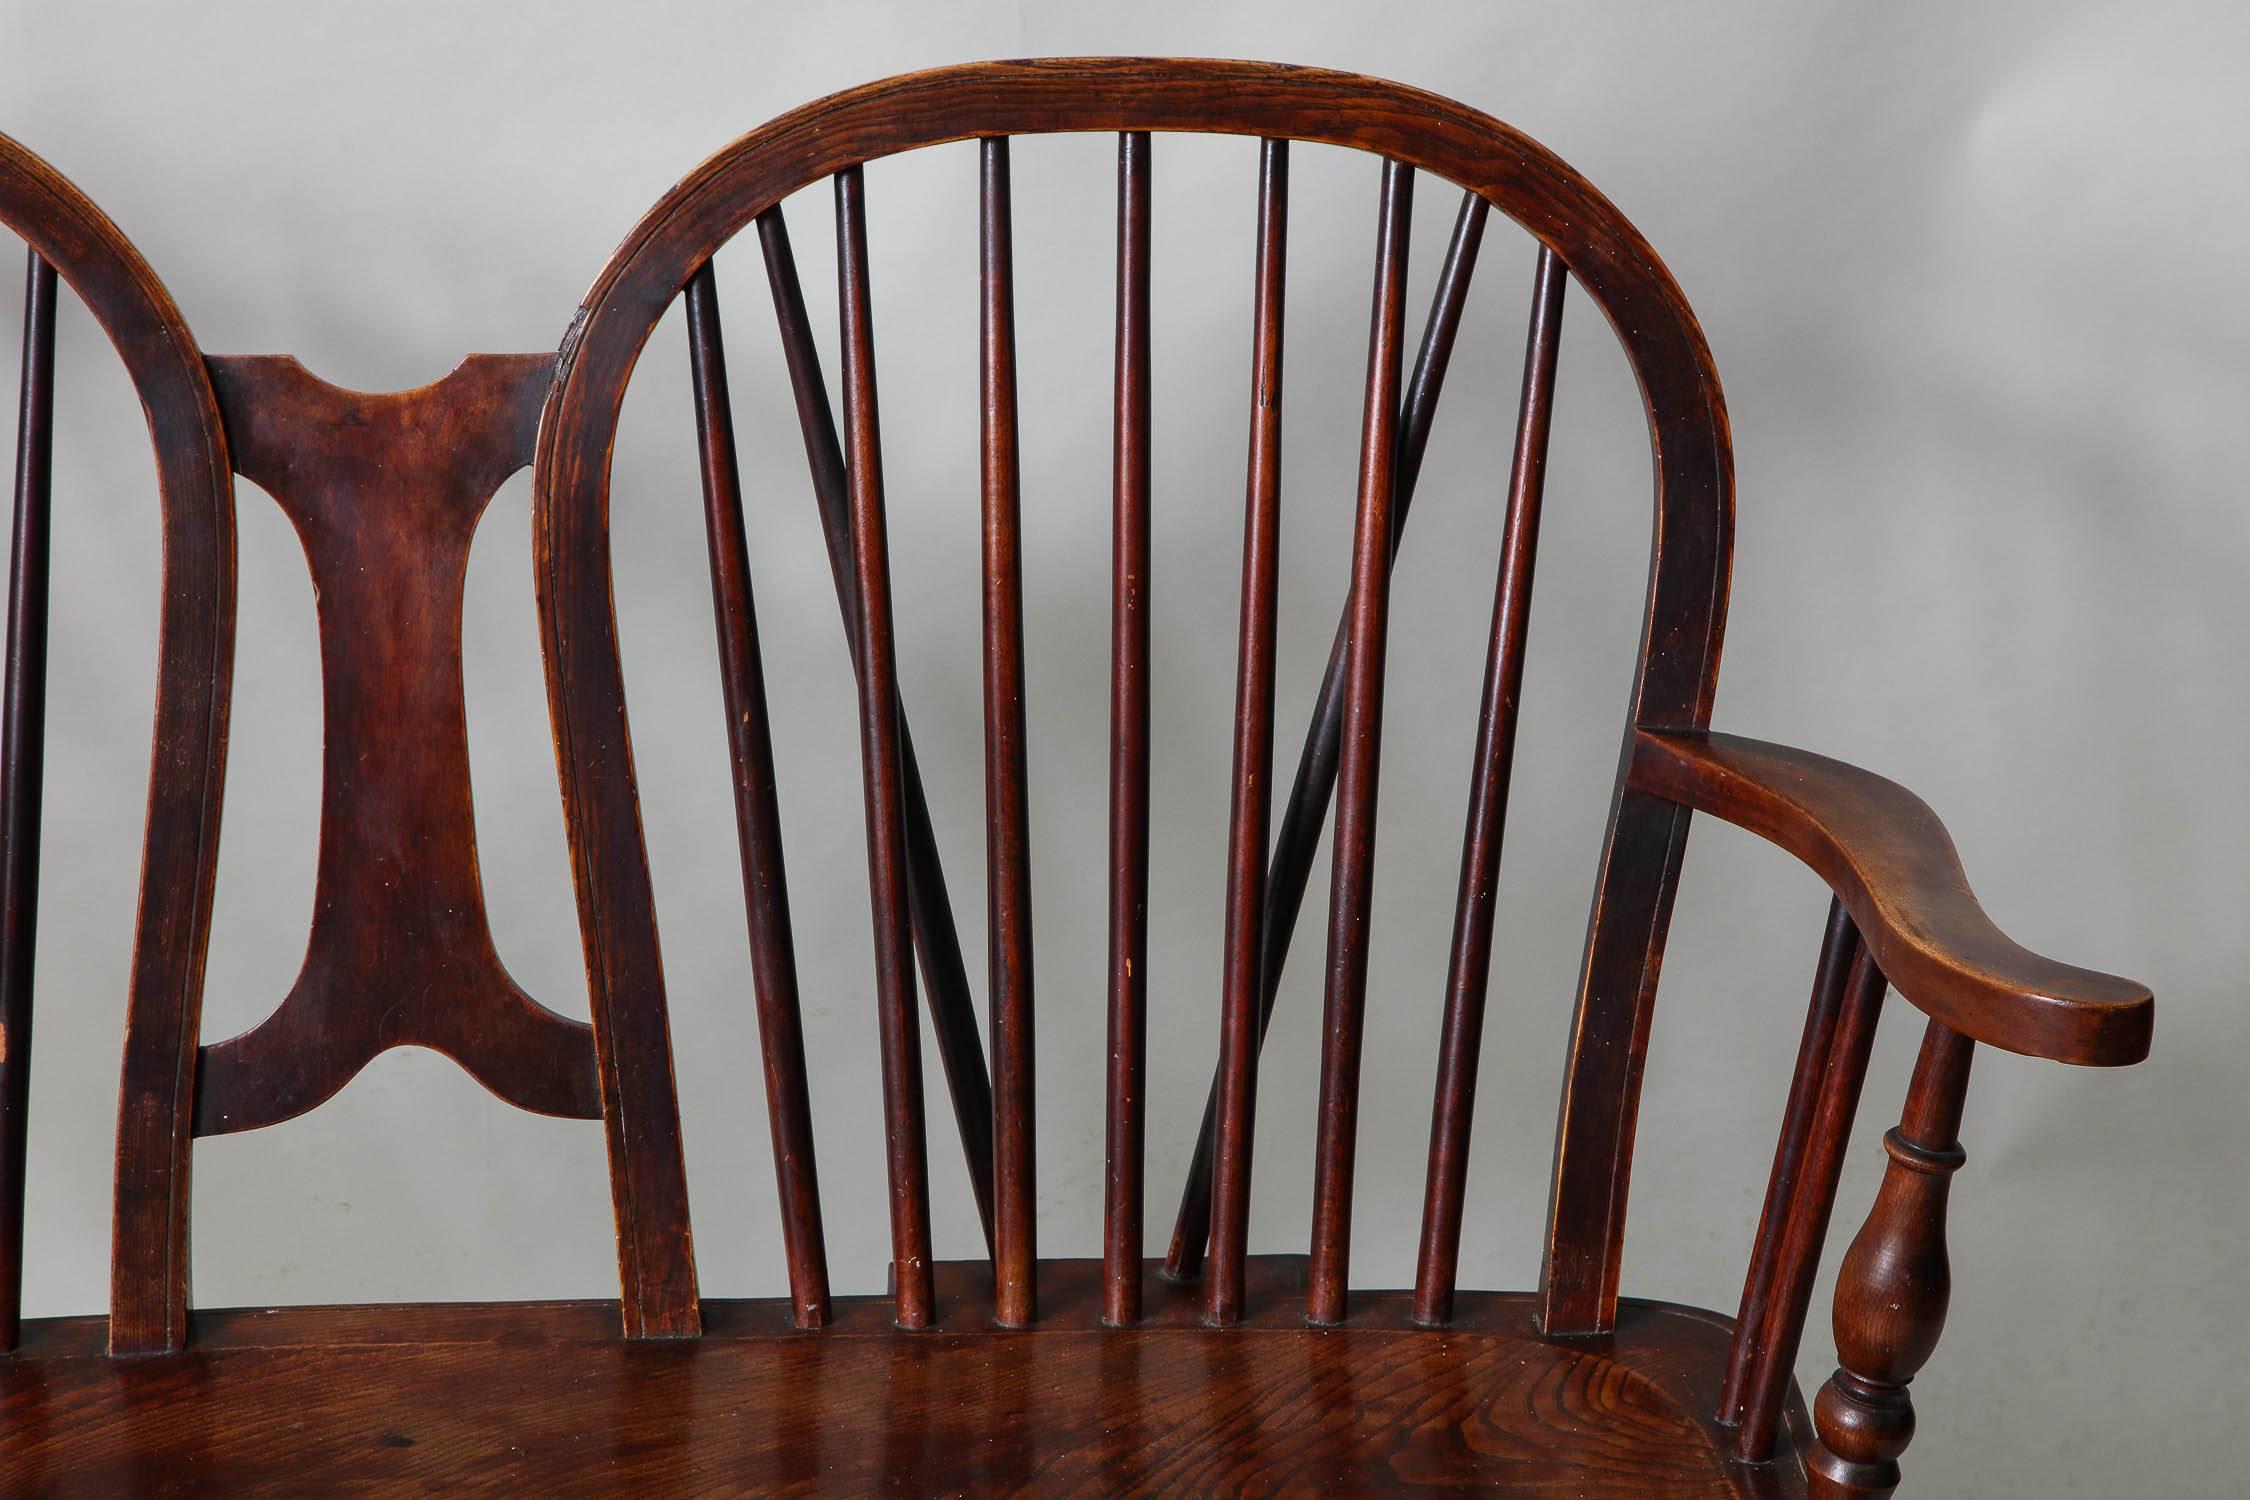 Unusual English double hoop chair back windsor settee in mixed woods, the two hoops with spindle supports and diagonal bracing, with turned arm supports over single plank elm saddled seat over turned legs joined by turned swell stretchers.